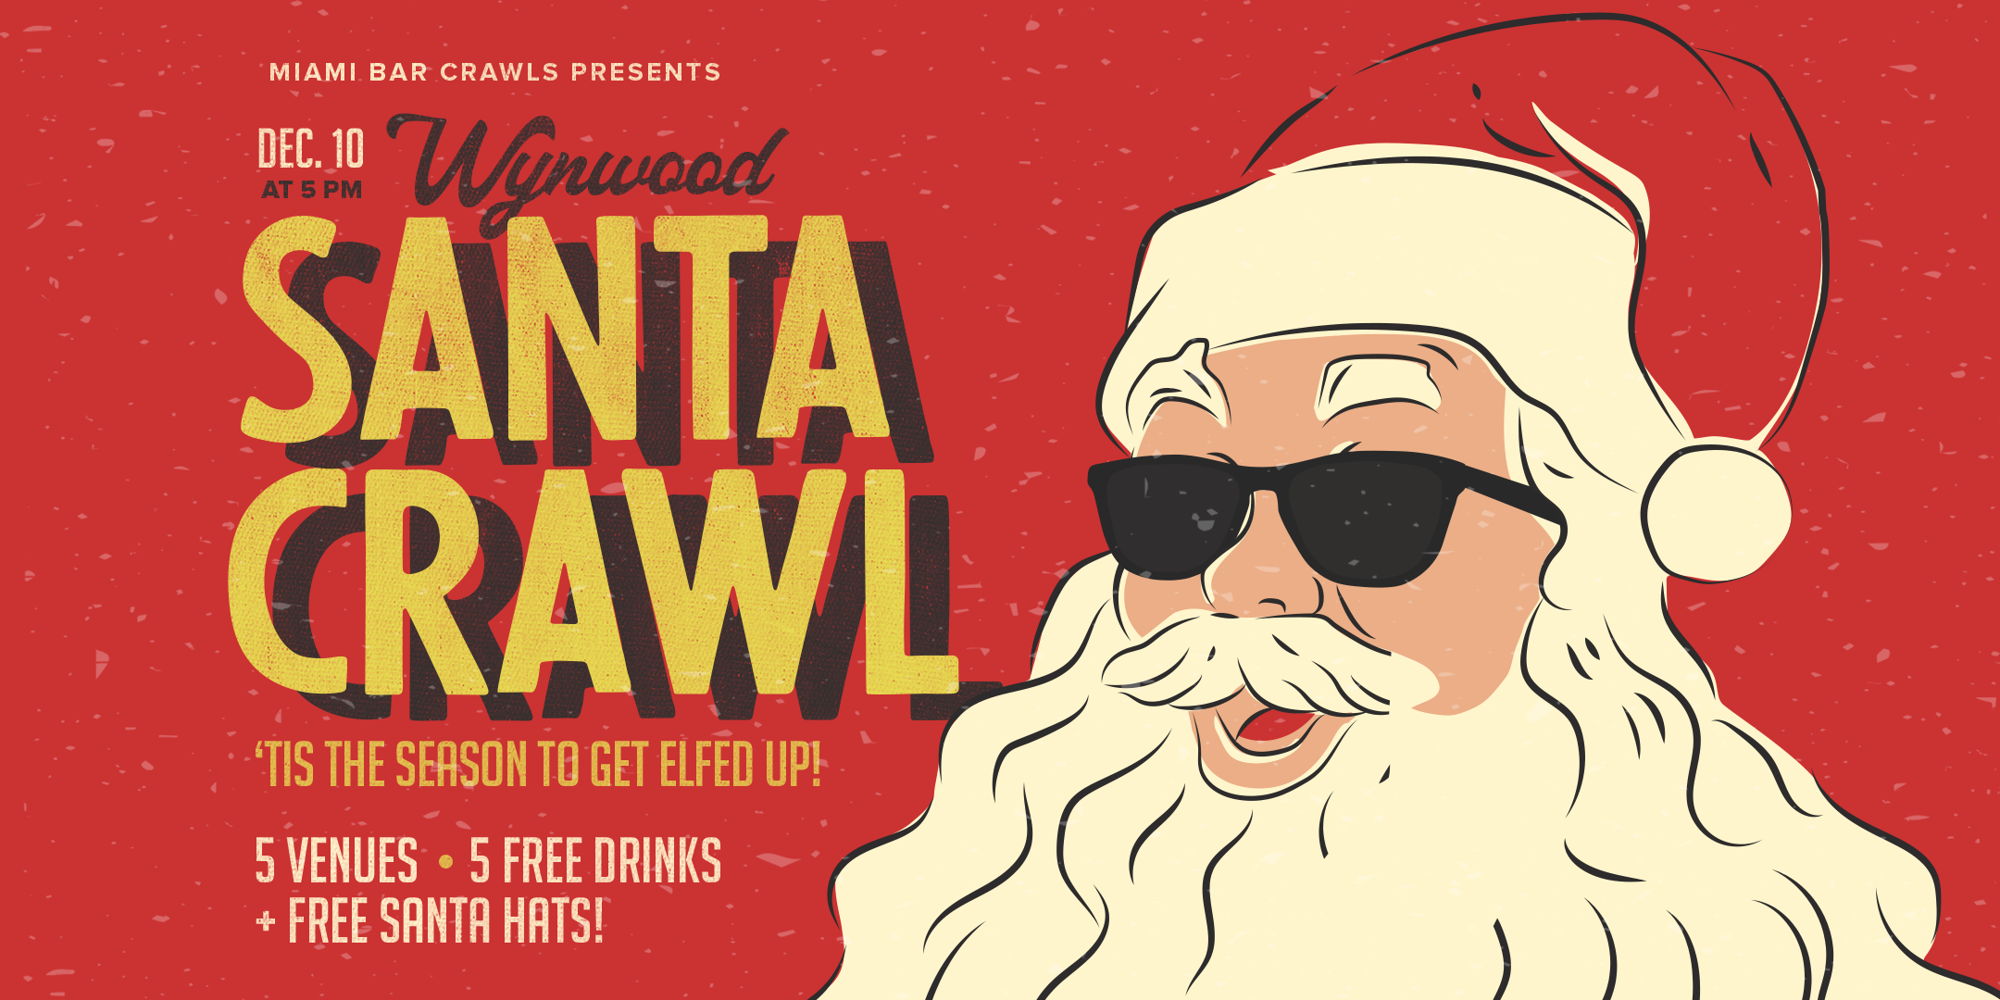 Miami Bar Crawls wants you to join us for our Wynwood Santa Crawl! promotional image